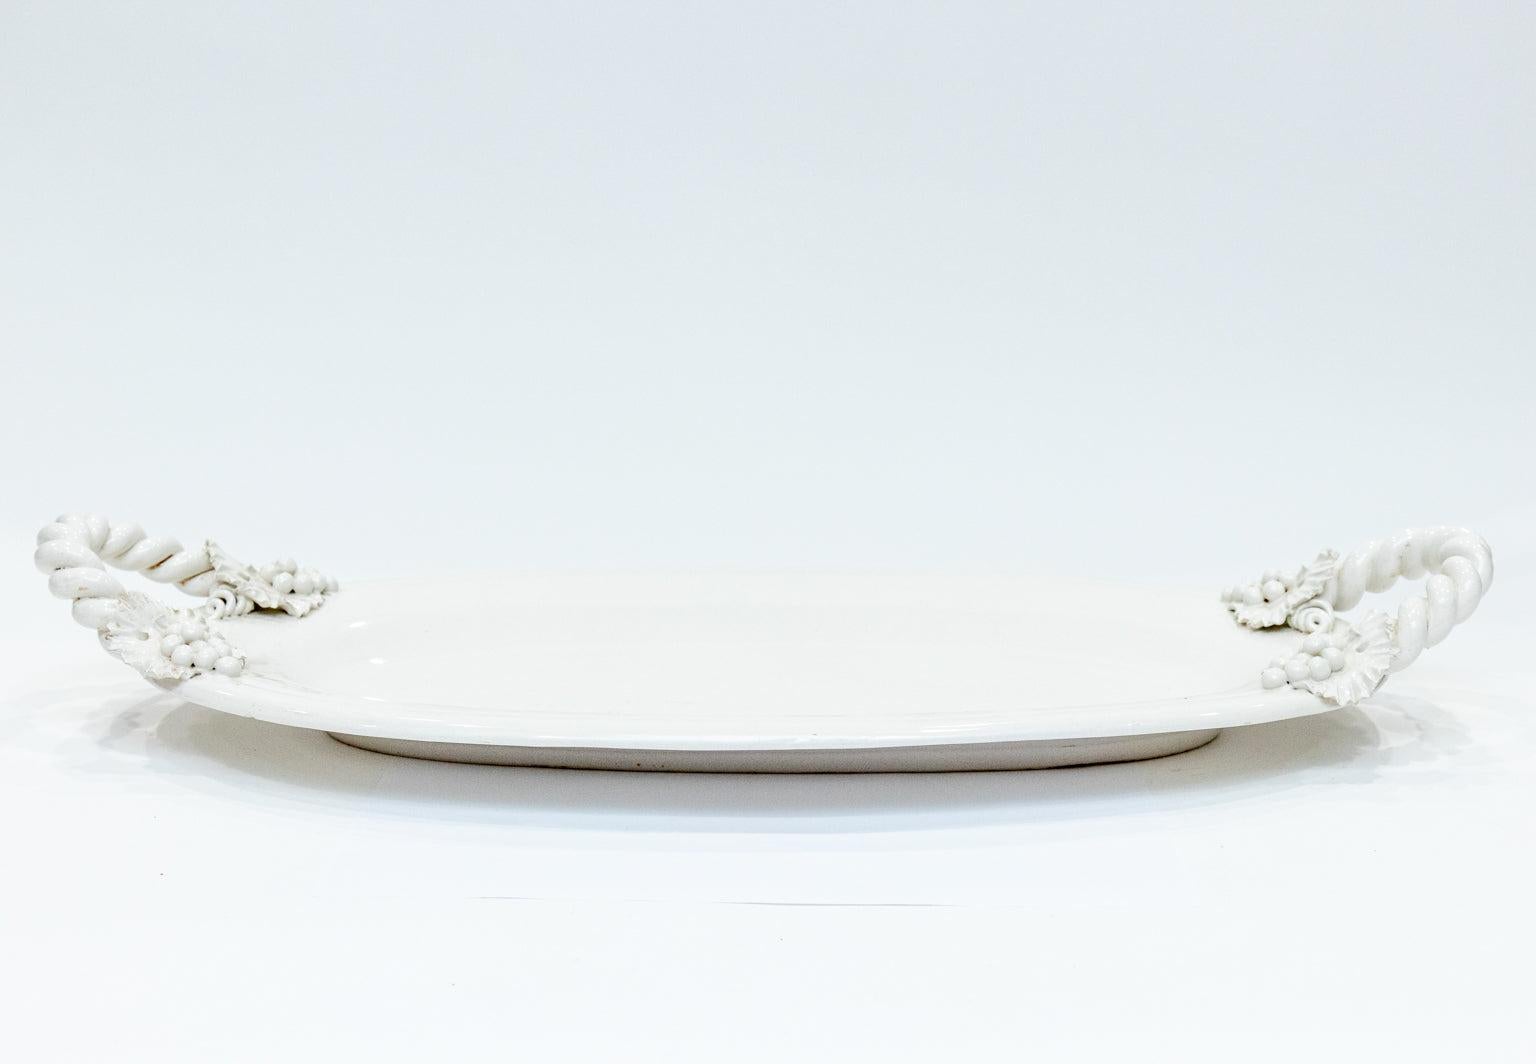 Oval form white porcelain platter featuring role twist design handles with applied floral sprays. Made in Italy. Please note wear consistent with age.
 